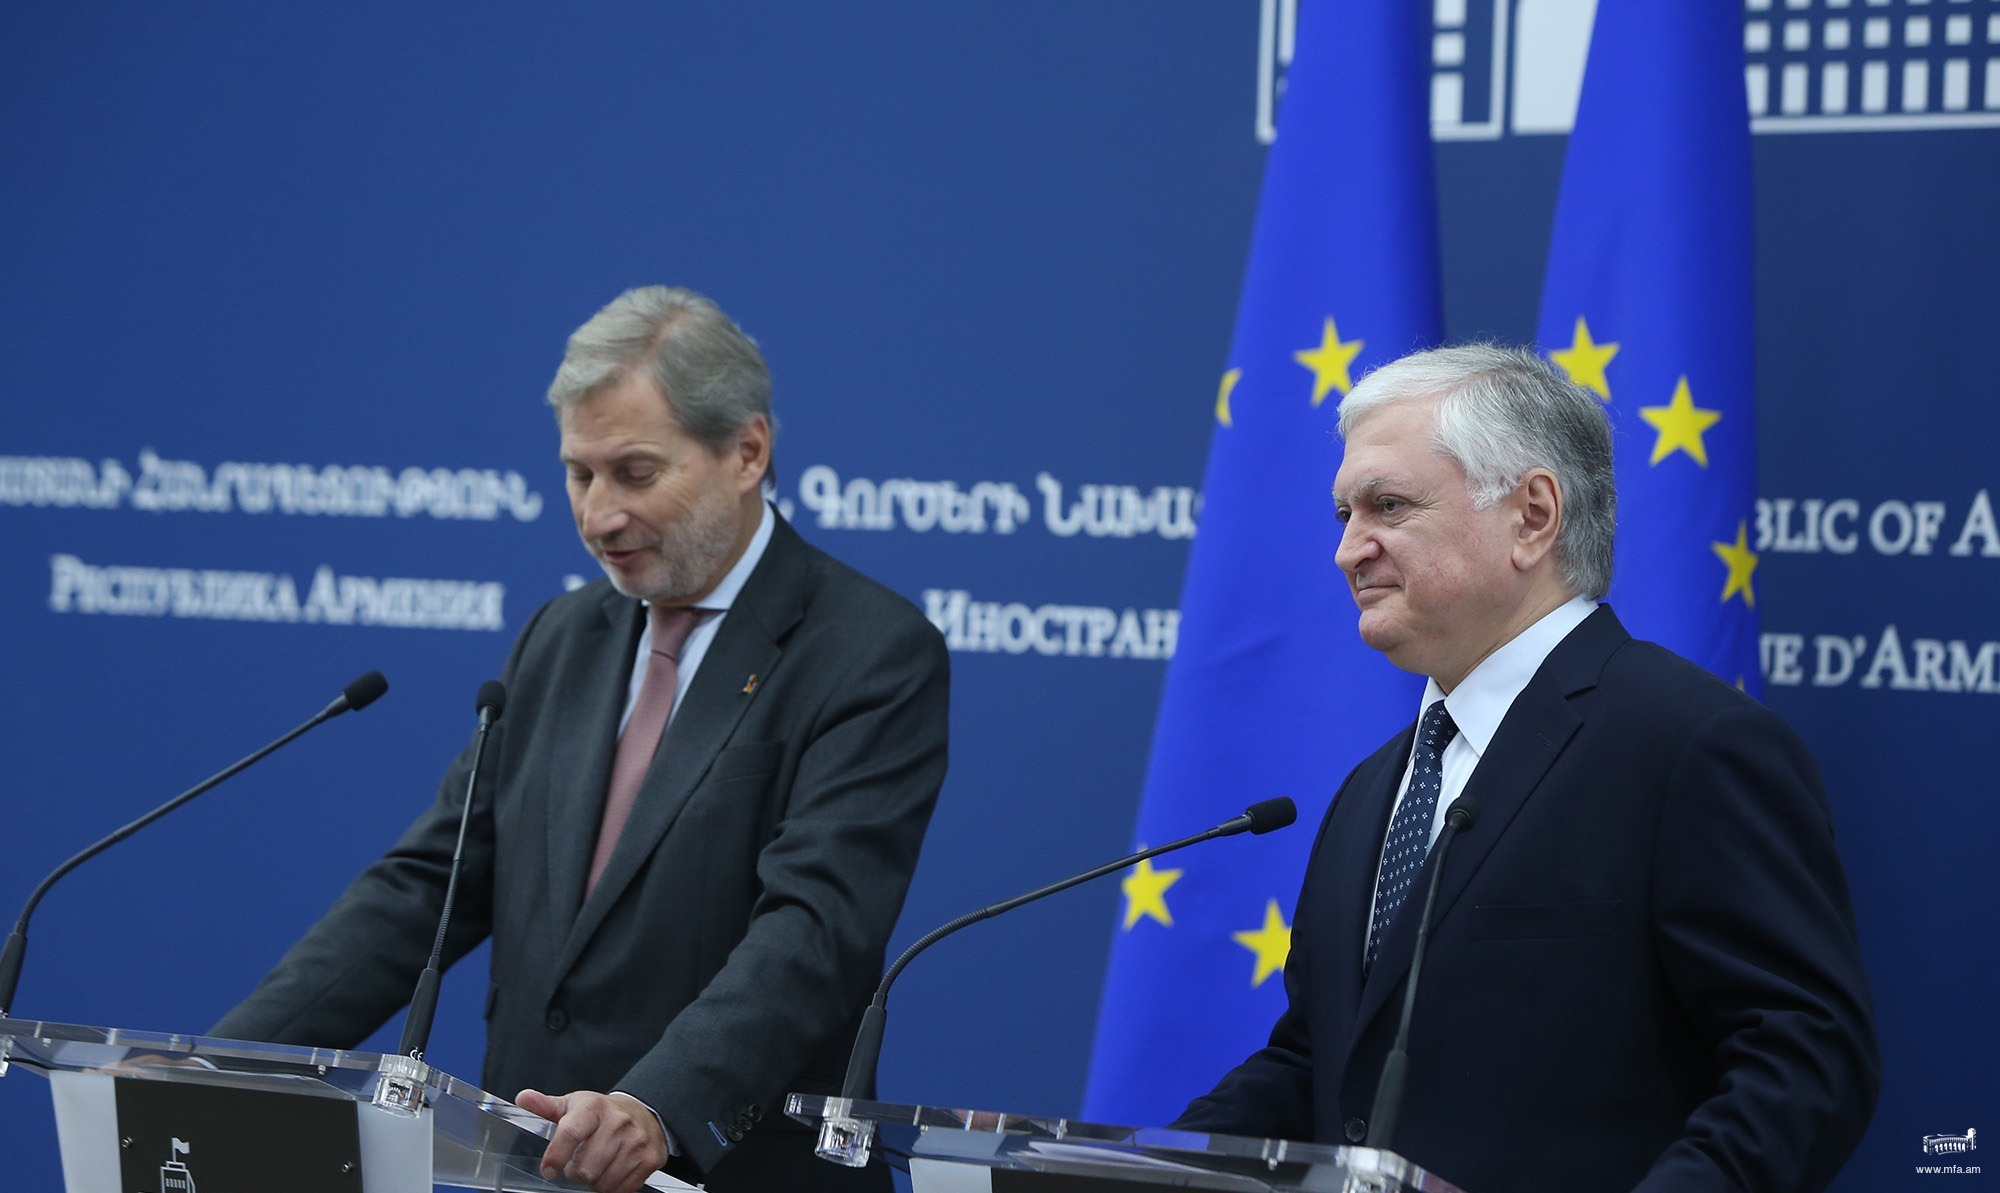 Edward Nalbandian had a meeting with EU Commissioner for Enlargement and European Neighbourhood Policy